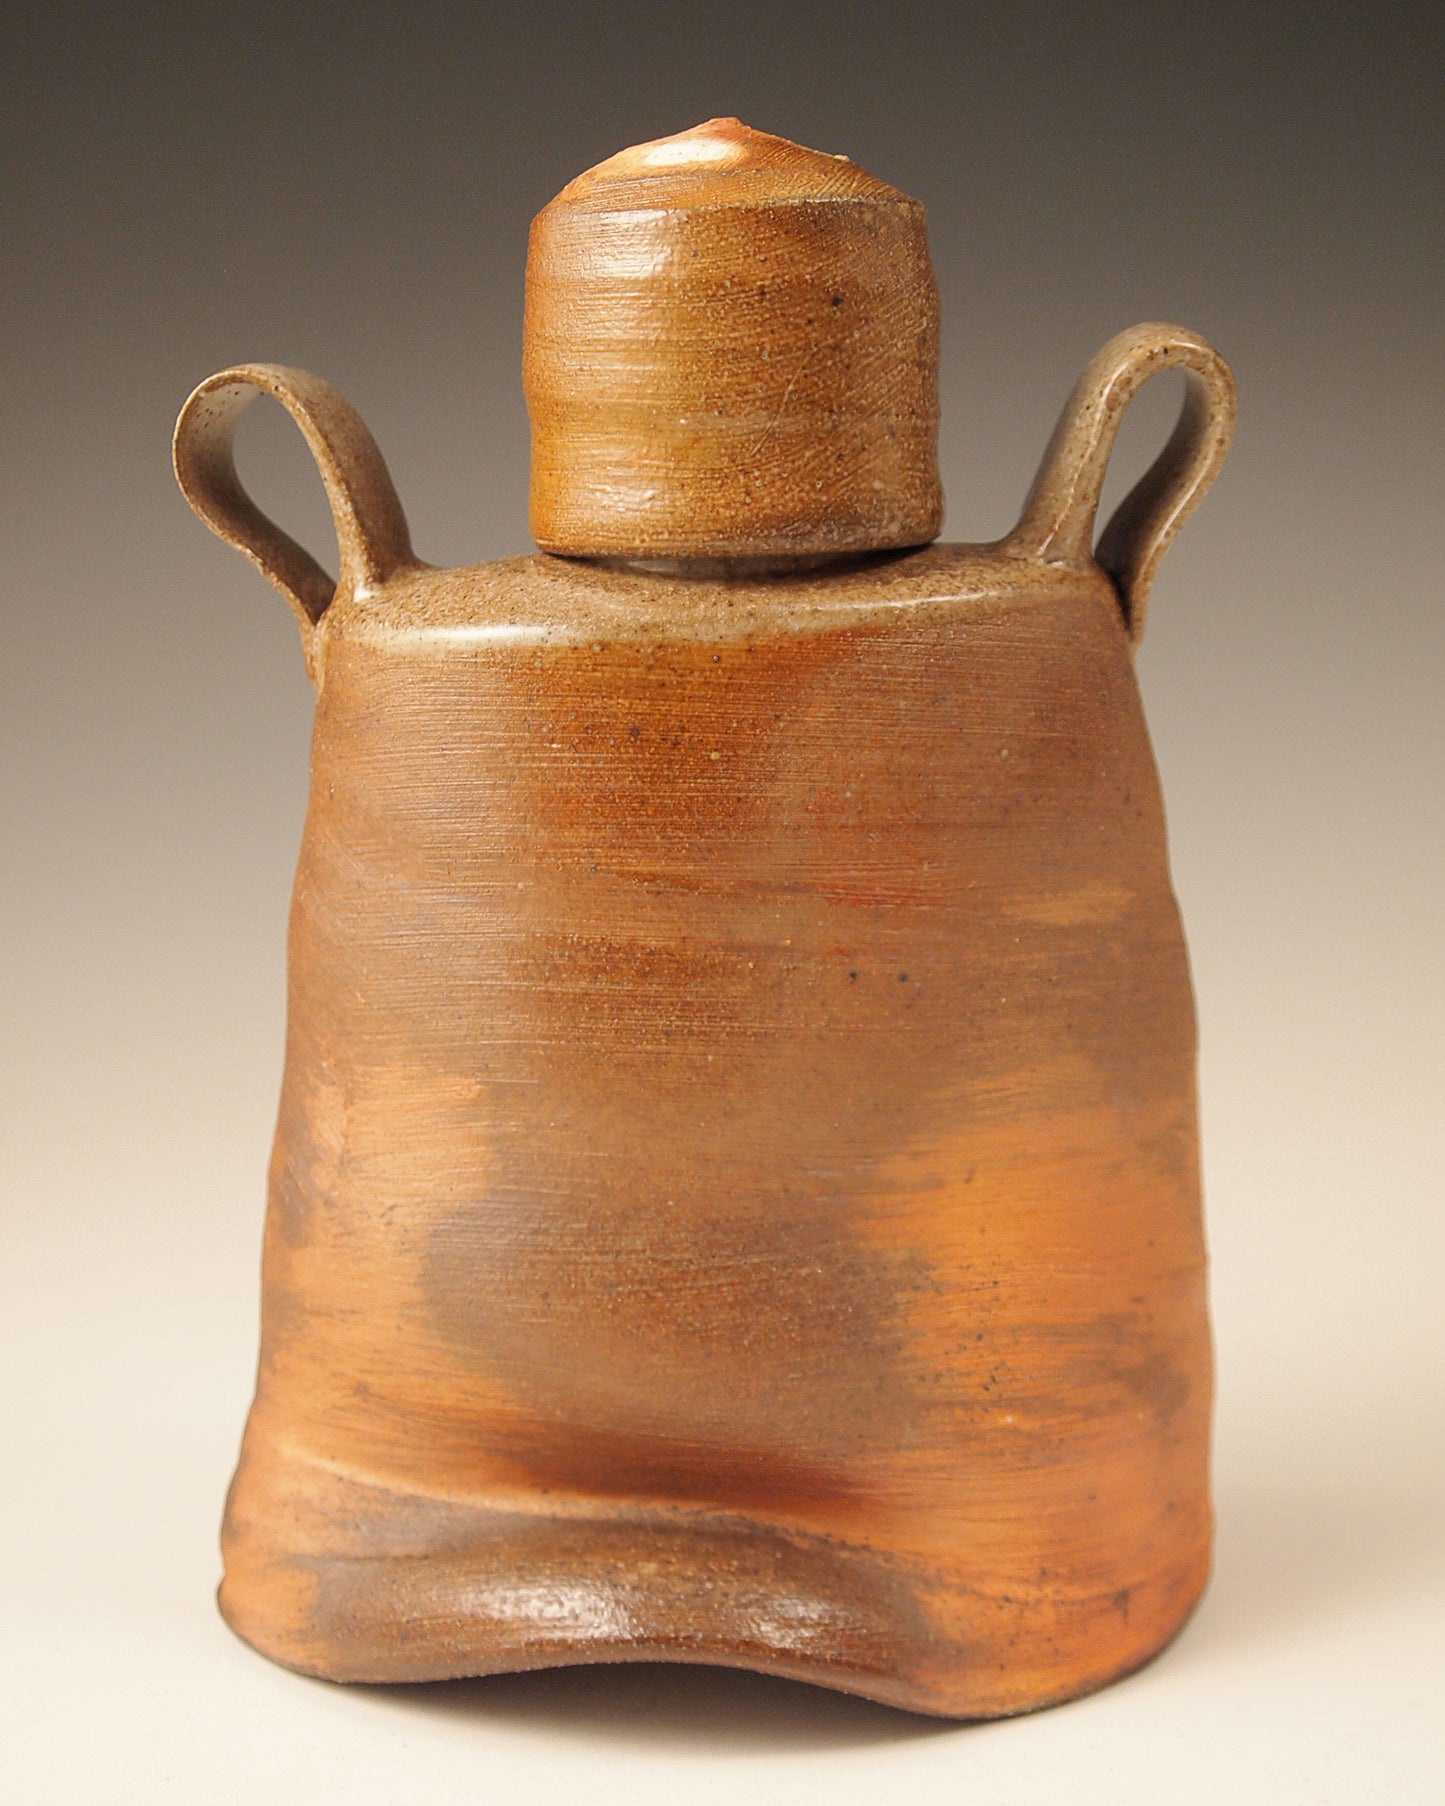 Small, handmade ceramic whiskey flask.  Wood-fired Stoneware.  Bright orange and brown slip exterior.  Rustic design. Back view.